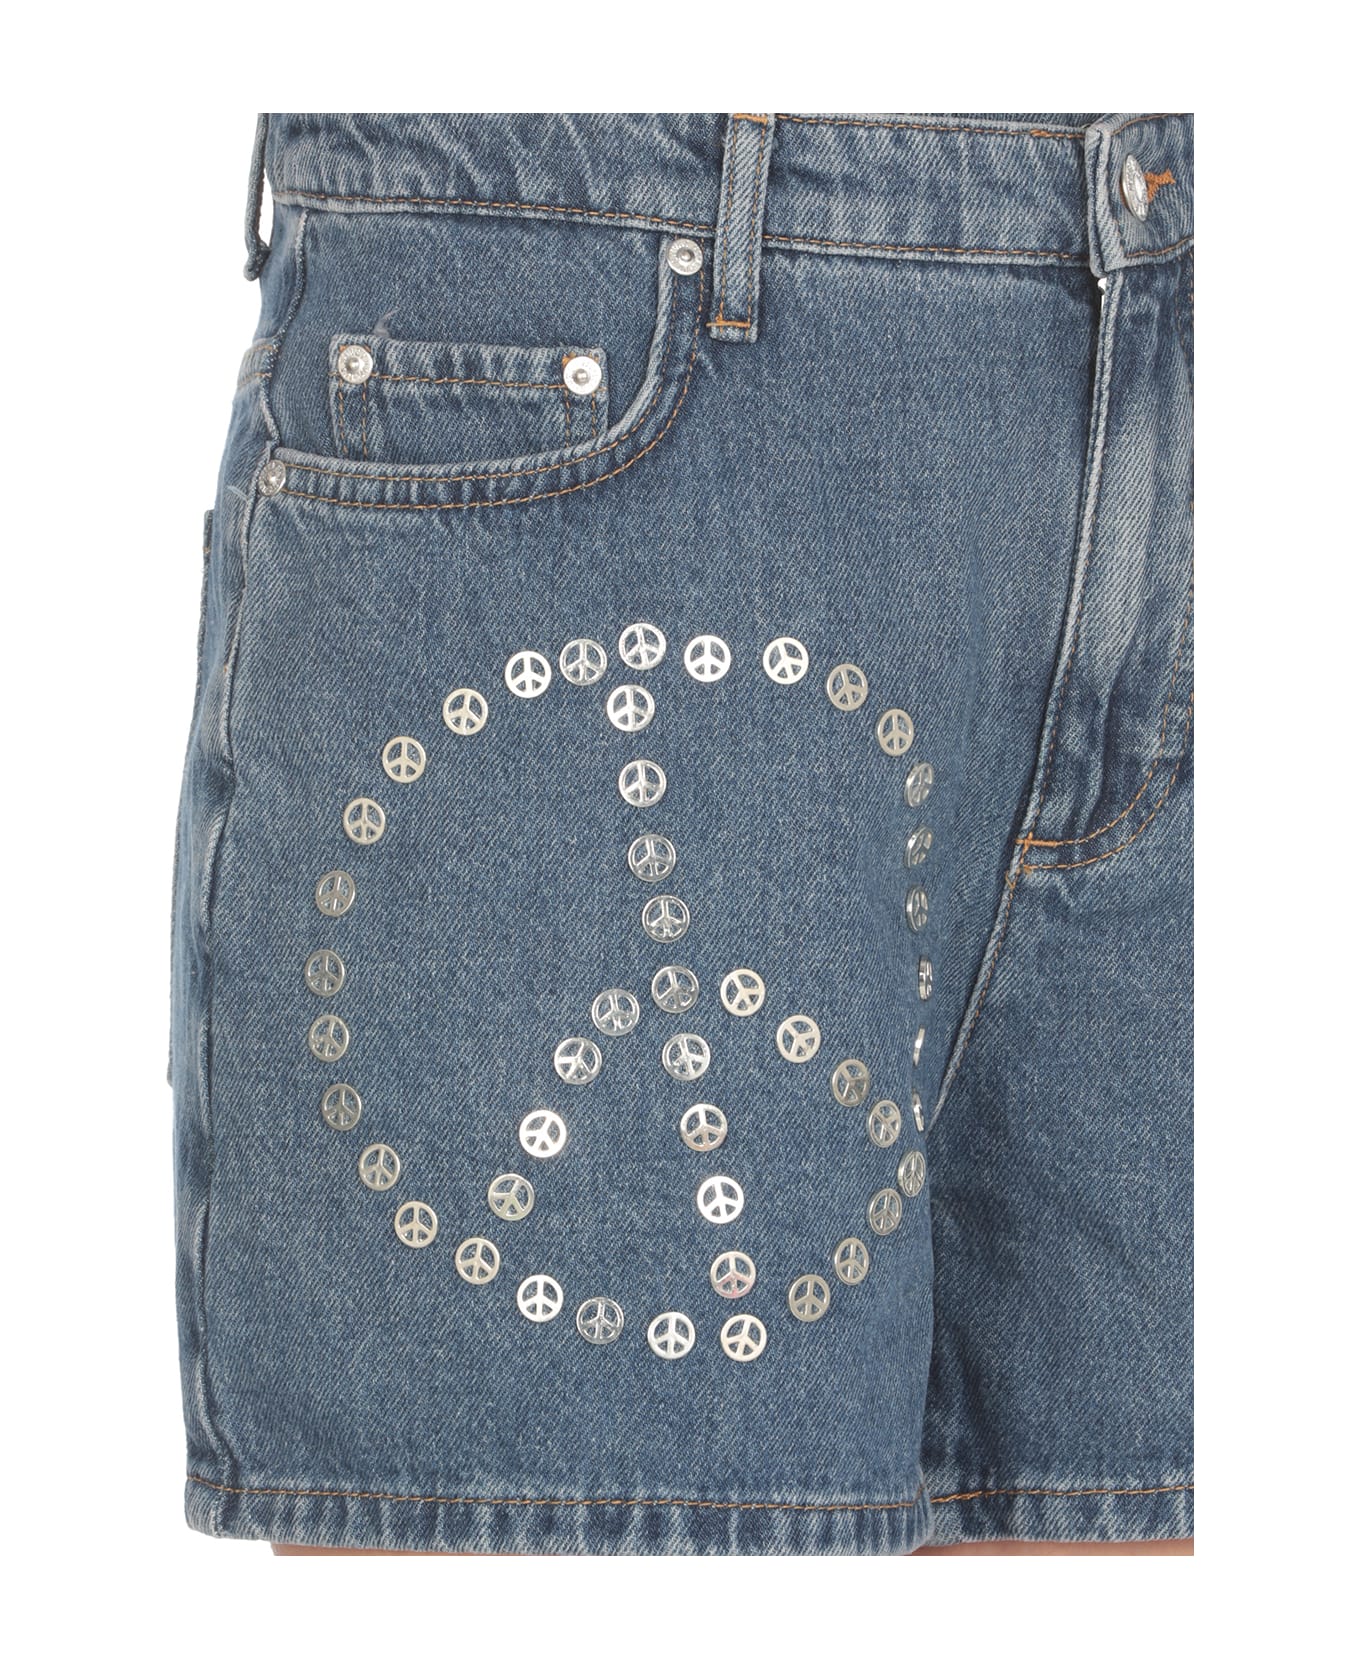 M05CH1N0 Jeans Shorts With Stud - Blue